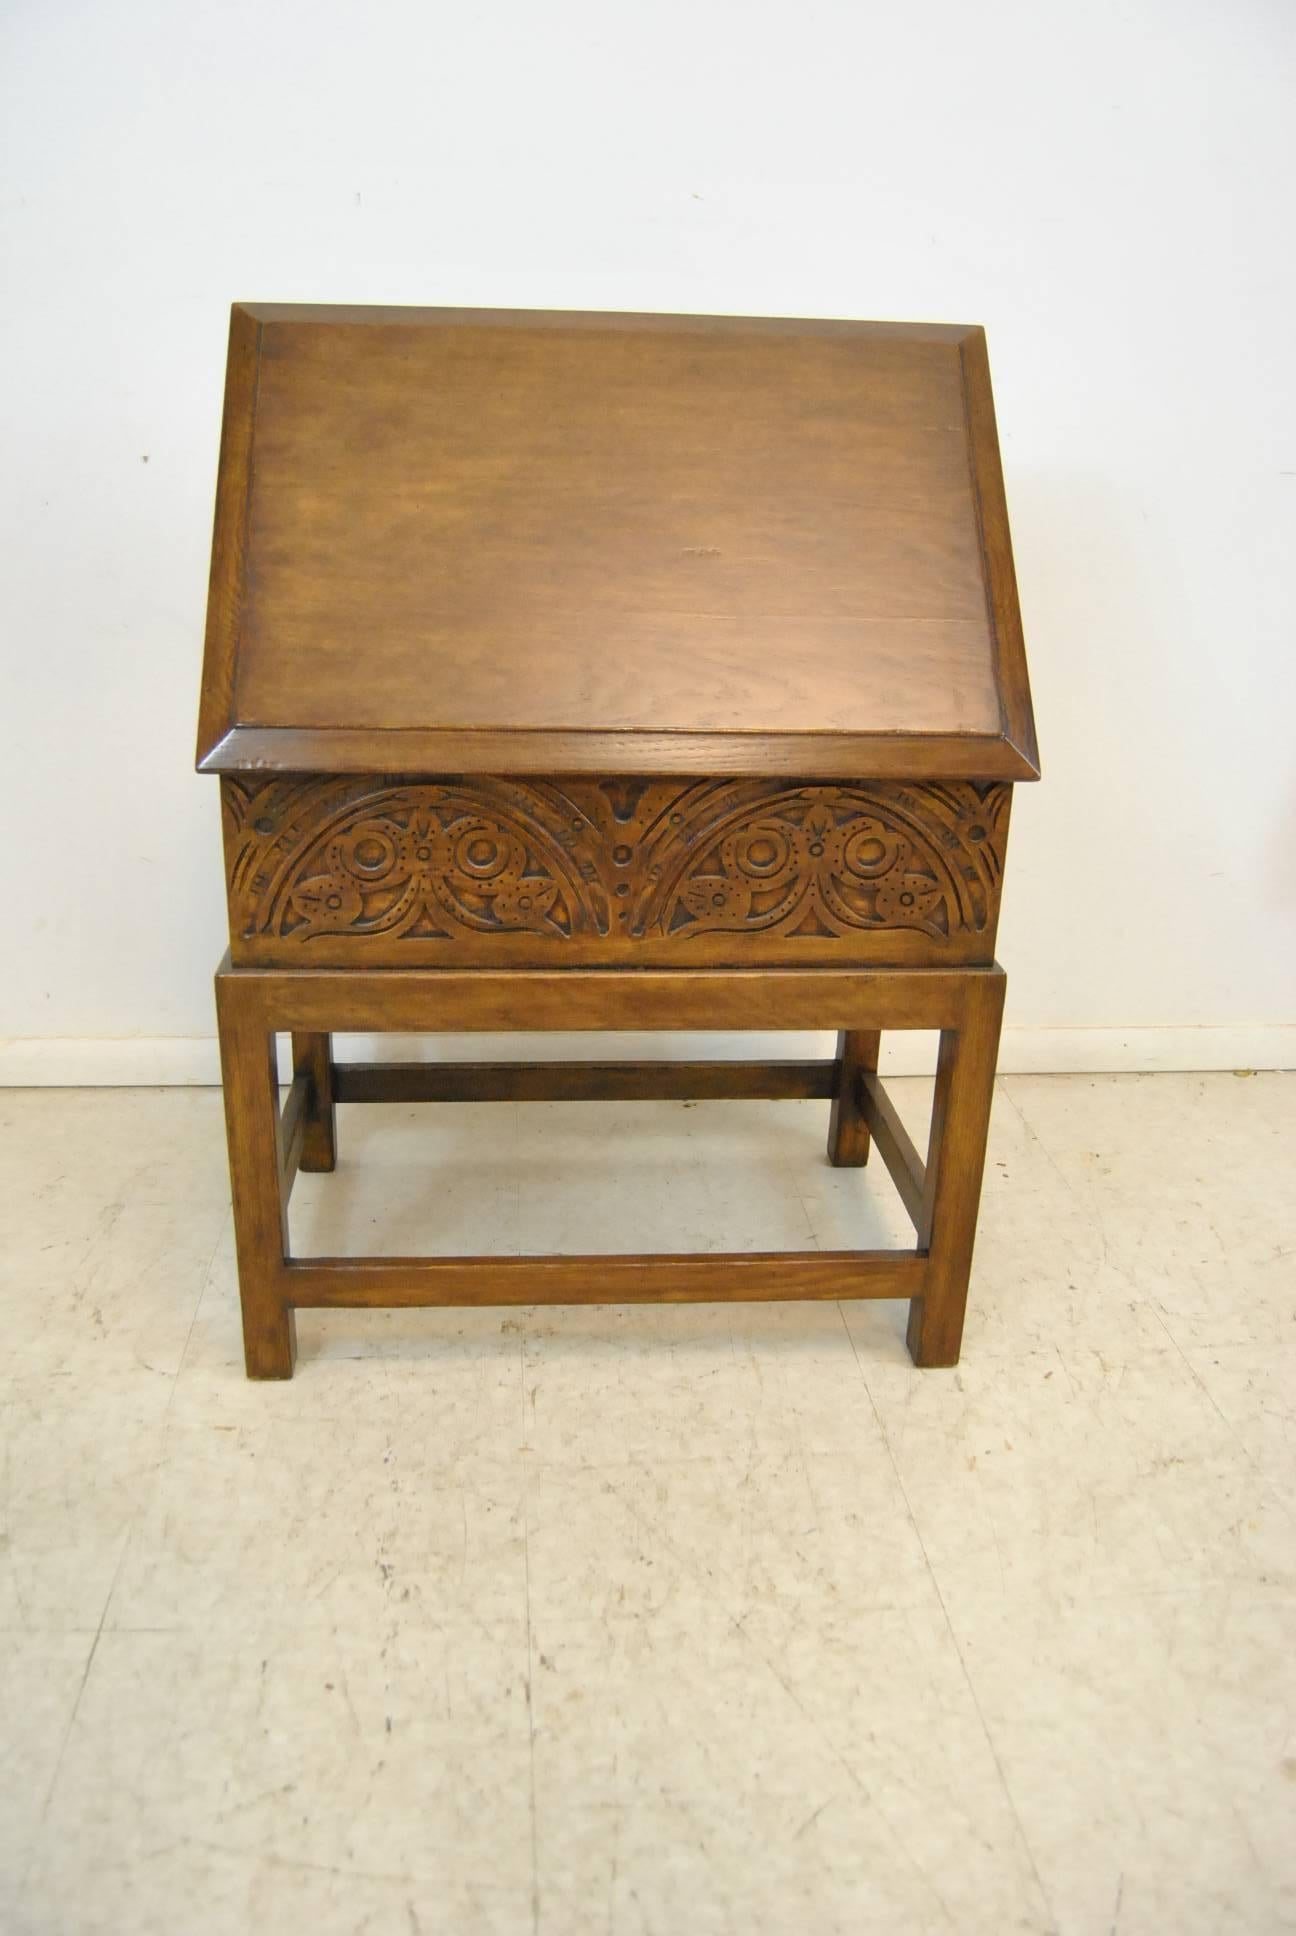 20th Century English Walnut Lift Top Bible Box on Stand by Minton-Spidell